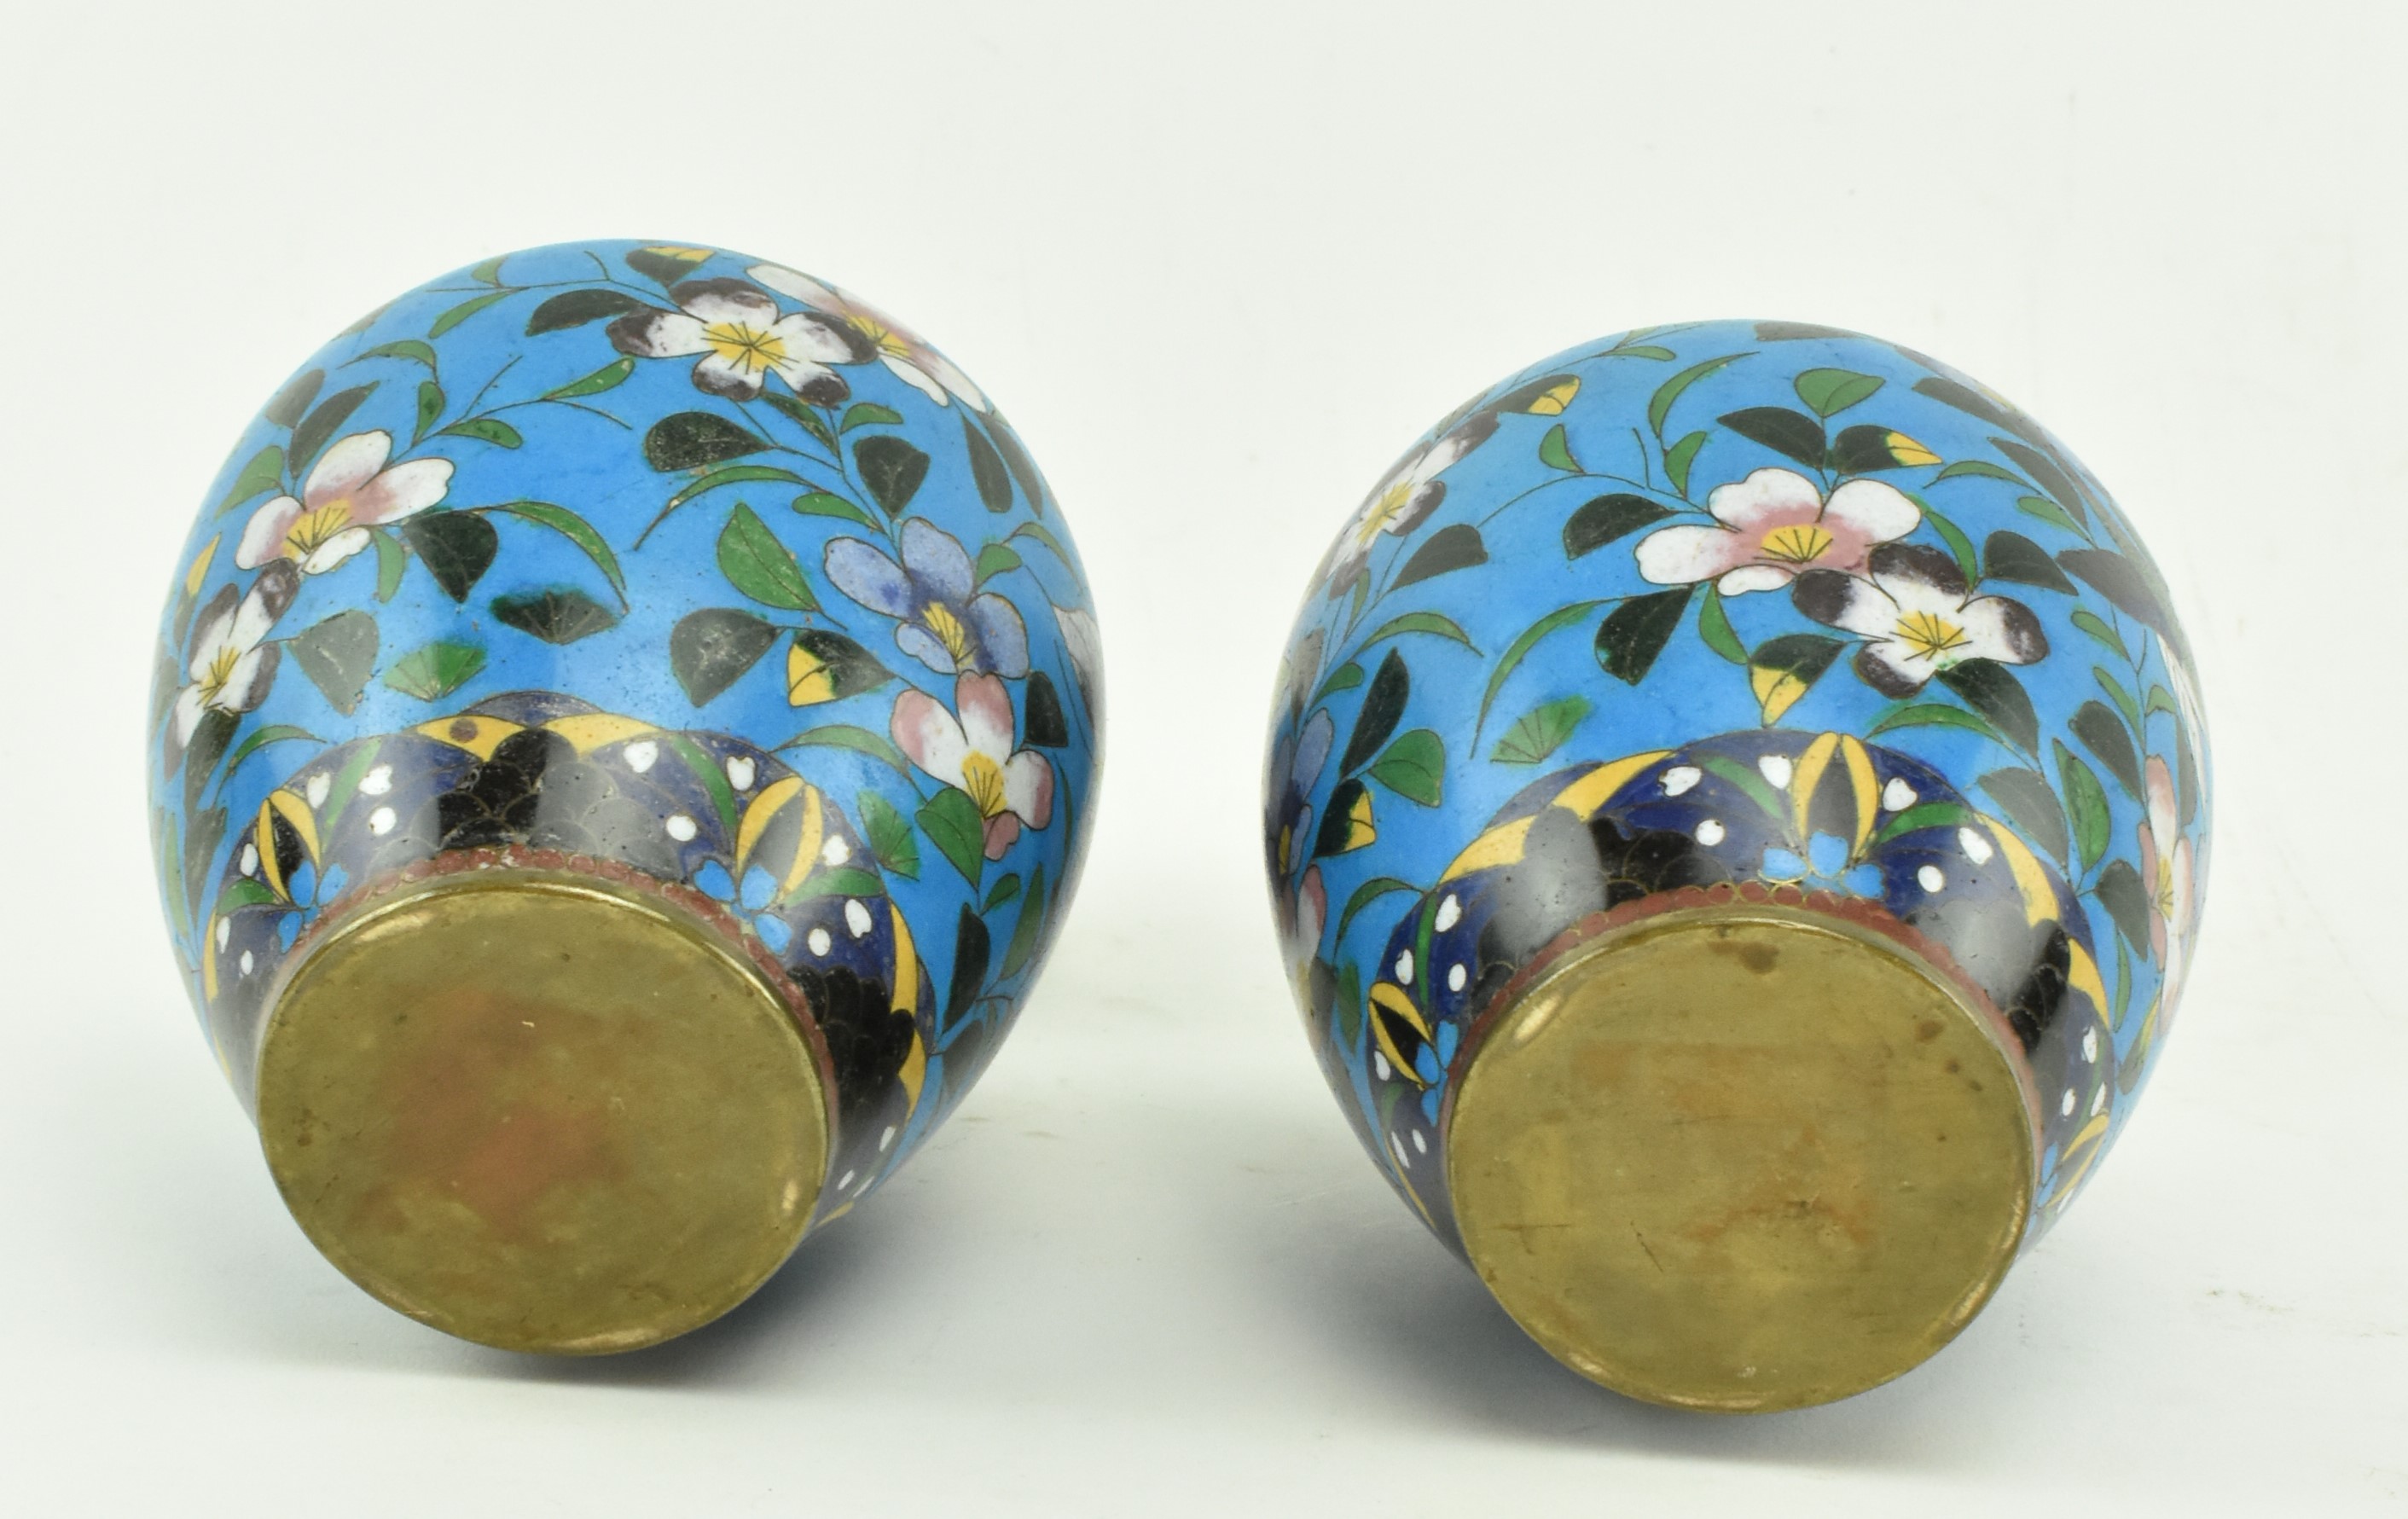 PAIR OF JAPANESE MEIJI PERIOD CLOISONNE JARS WITH COVER - Image 6 of 6